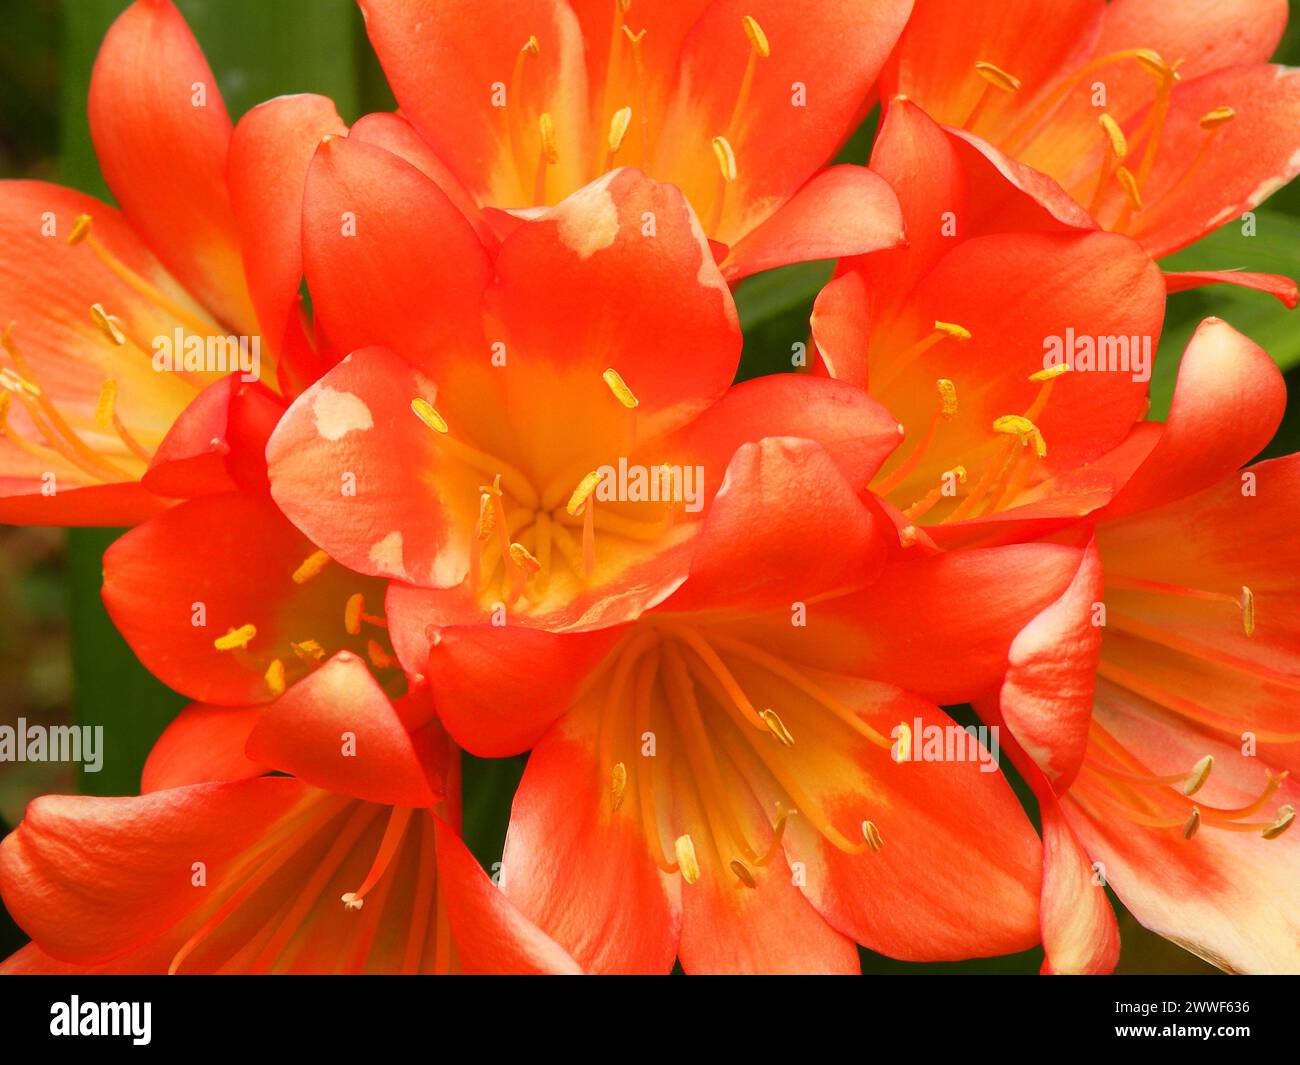 Clivia miniata, gives orange flowers, with a weak and sweet fragrance Stock Photo